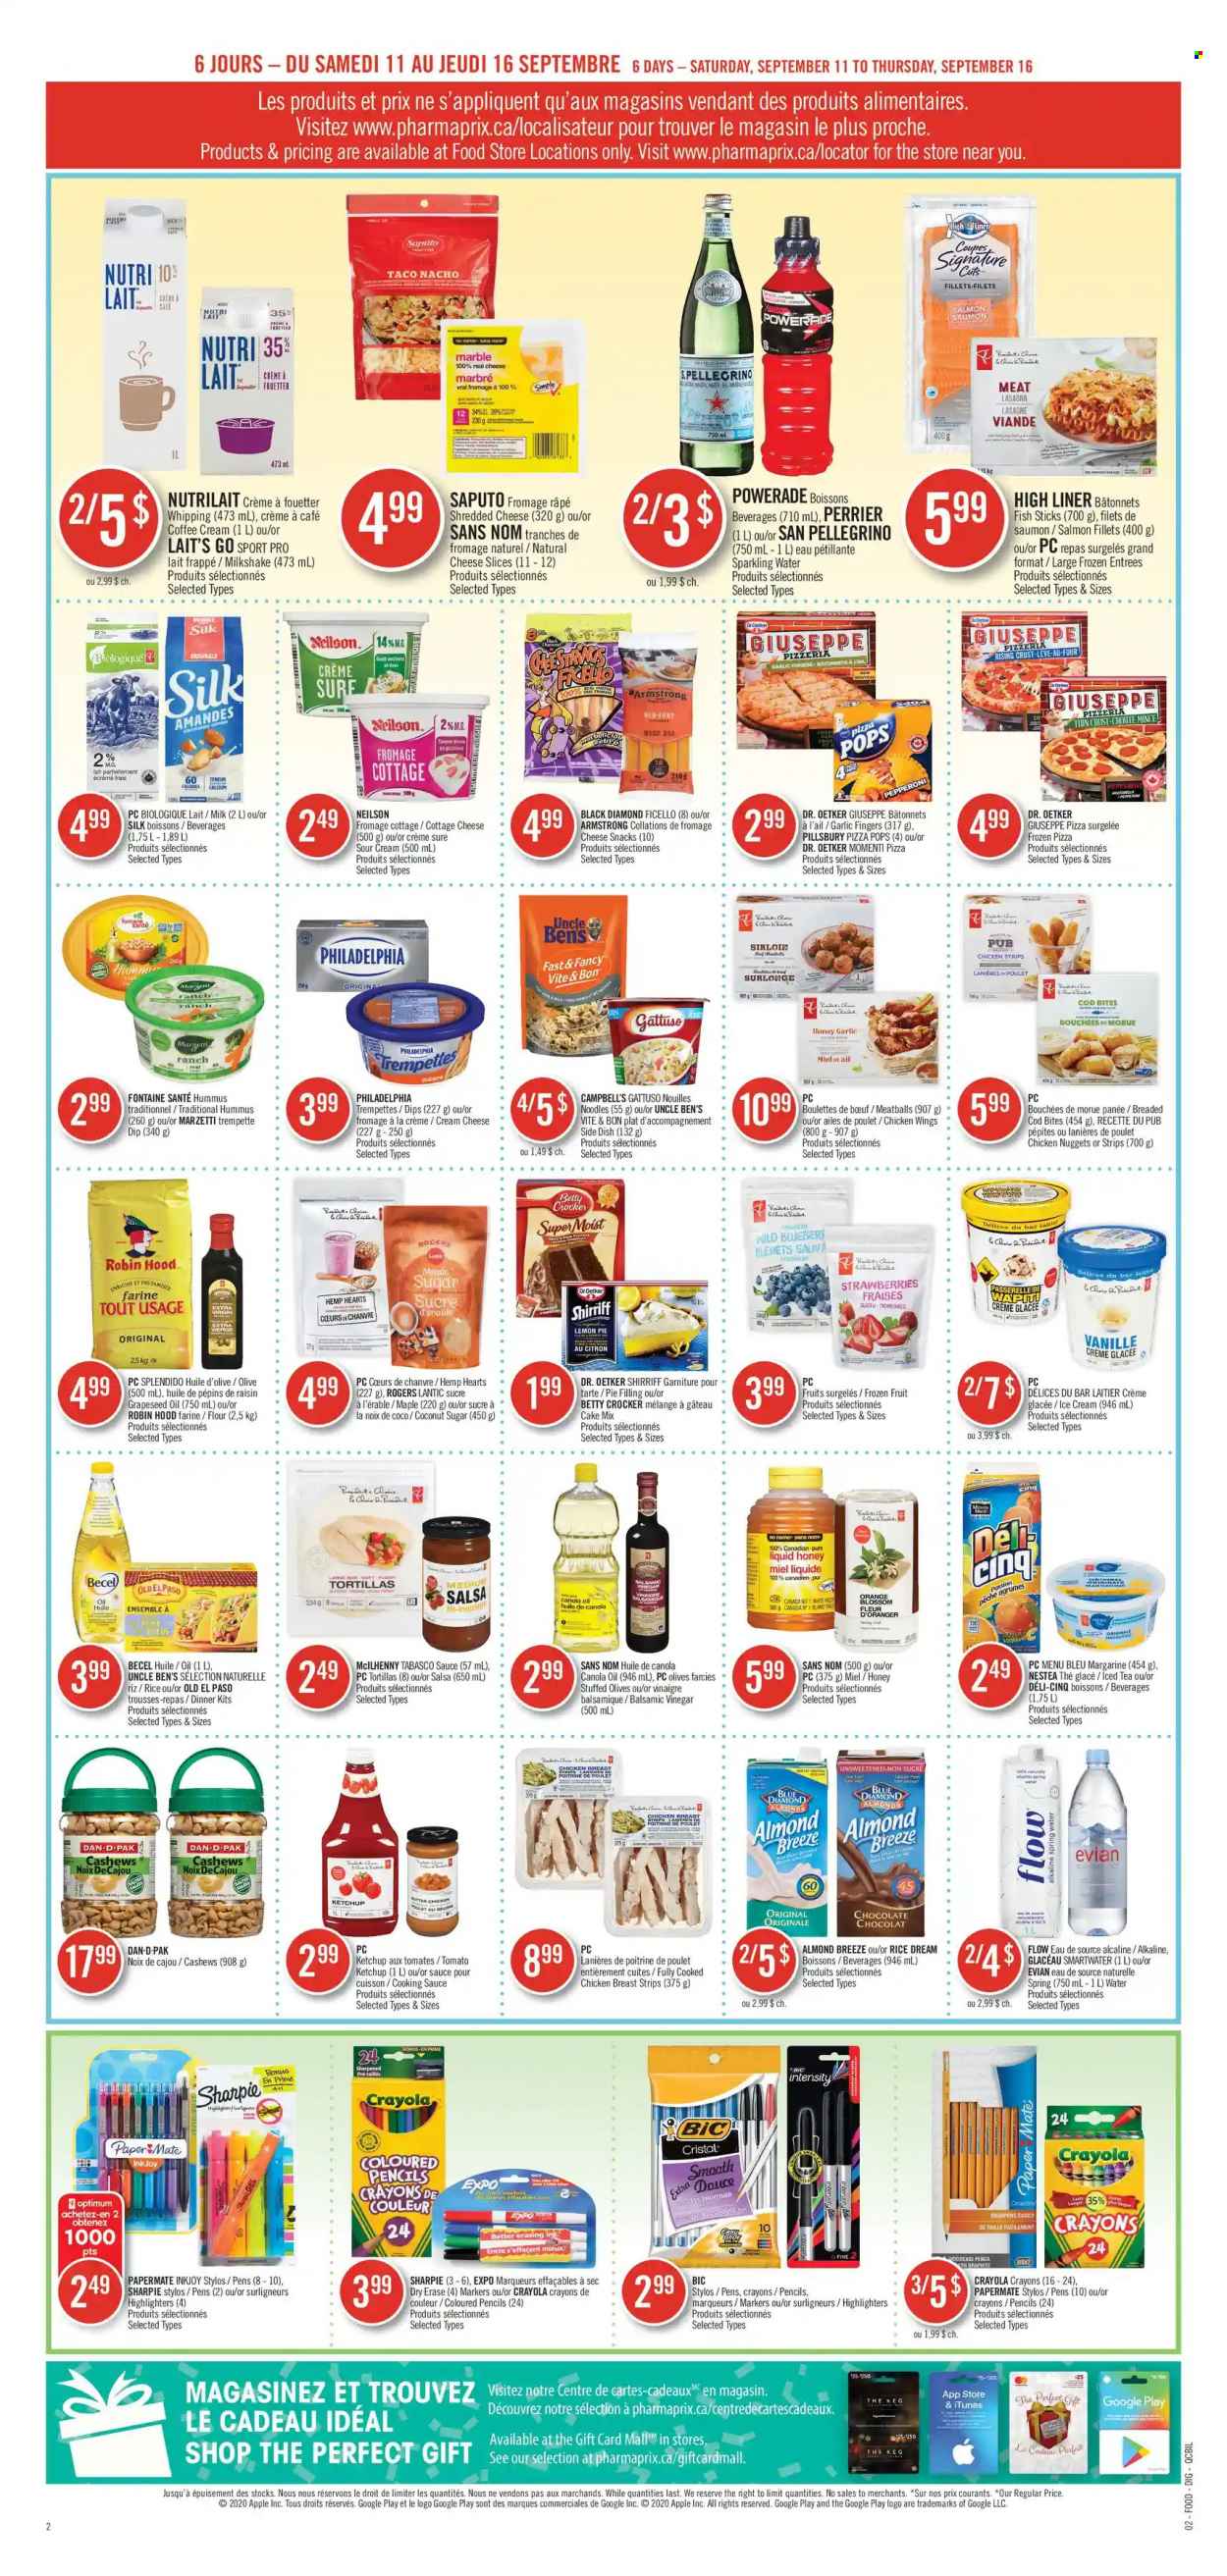 thumbnail - Pharmaprix Flyer - September 11, 2021 - September 16, 2021 - Sales products - tortillas, Old El Paso, cake mix, garlic, strawberries, coconut, cod, salmon, salmon fillet, fish, fish fingers, No Name, fish sticks, Campbell's, pizza, meatballs, nuggets, Pillsbury, chicken nuggets, dinner kit, noodles, lasagna meal, pepperoni, hummus, cottage cheese, shredded cheese, sliced cheese, Dr. Oetker, milkshake, Silk, Almond Breeze, margarine, Blossom, sour cream, dip, ice cream, chicken wings, strips, chicken strips, snack, sugar, tabasco, pie filling, coconut sugar, Uncle Ben's, salsa, balsamic vinegar, canola oil, vinegar, oil, grape seed oil, honey, cashews, Blue Diamond, Powerade, ice tea, Perrier, spring water, sparkling water, Smartwater, Evian, San Pellegrino, coffee, chicken, Sure, BIC, pot, crayons, paper, pencil, Paper Mate, Sharpie, ketchup, Philadelphia, olives, oranges. Page 7.